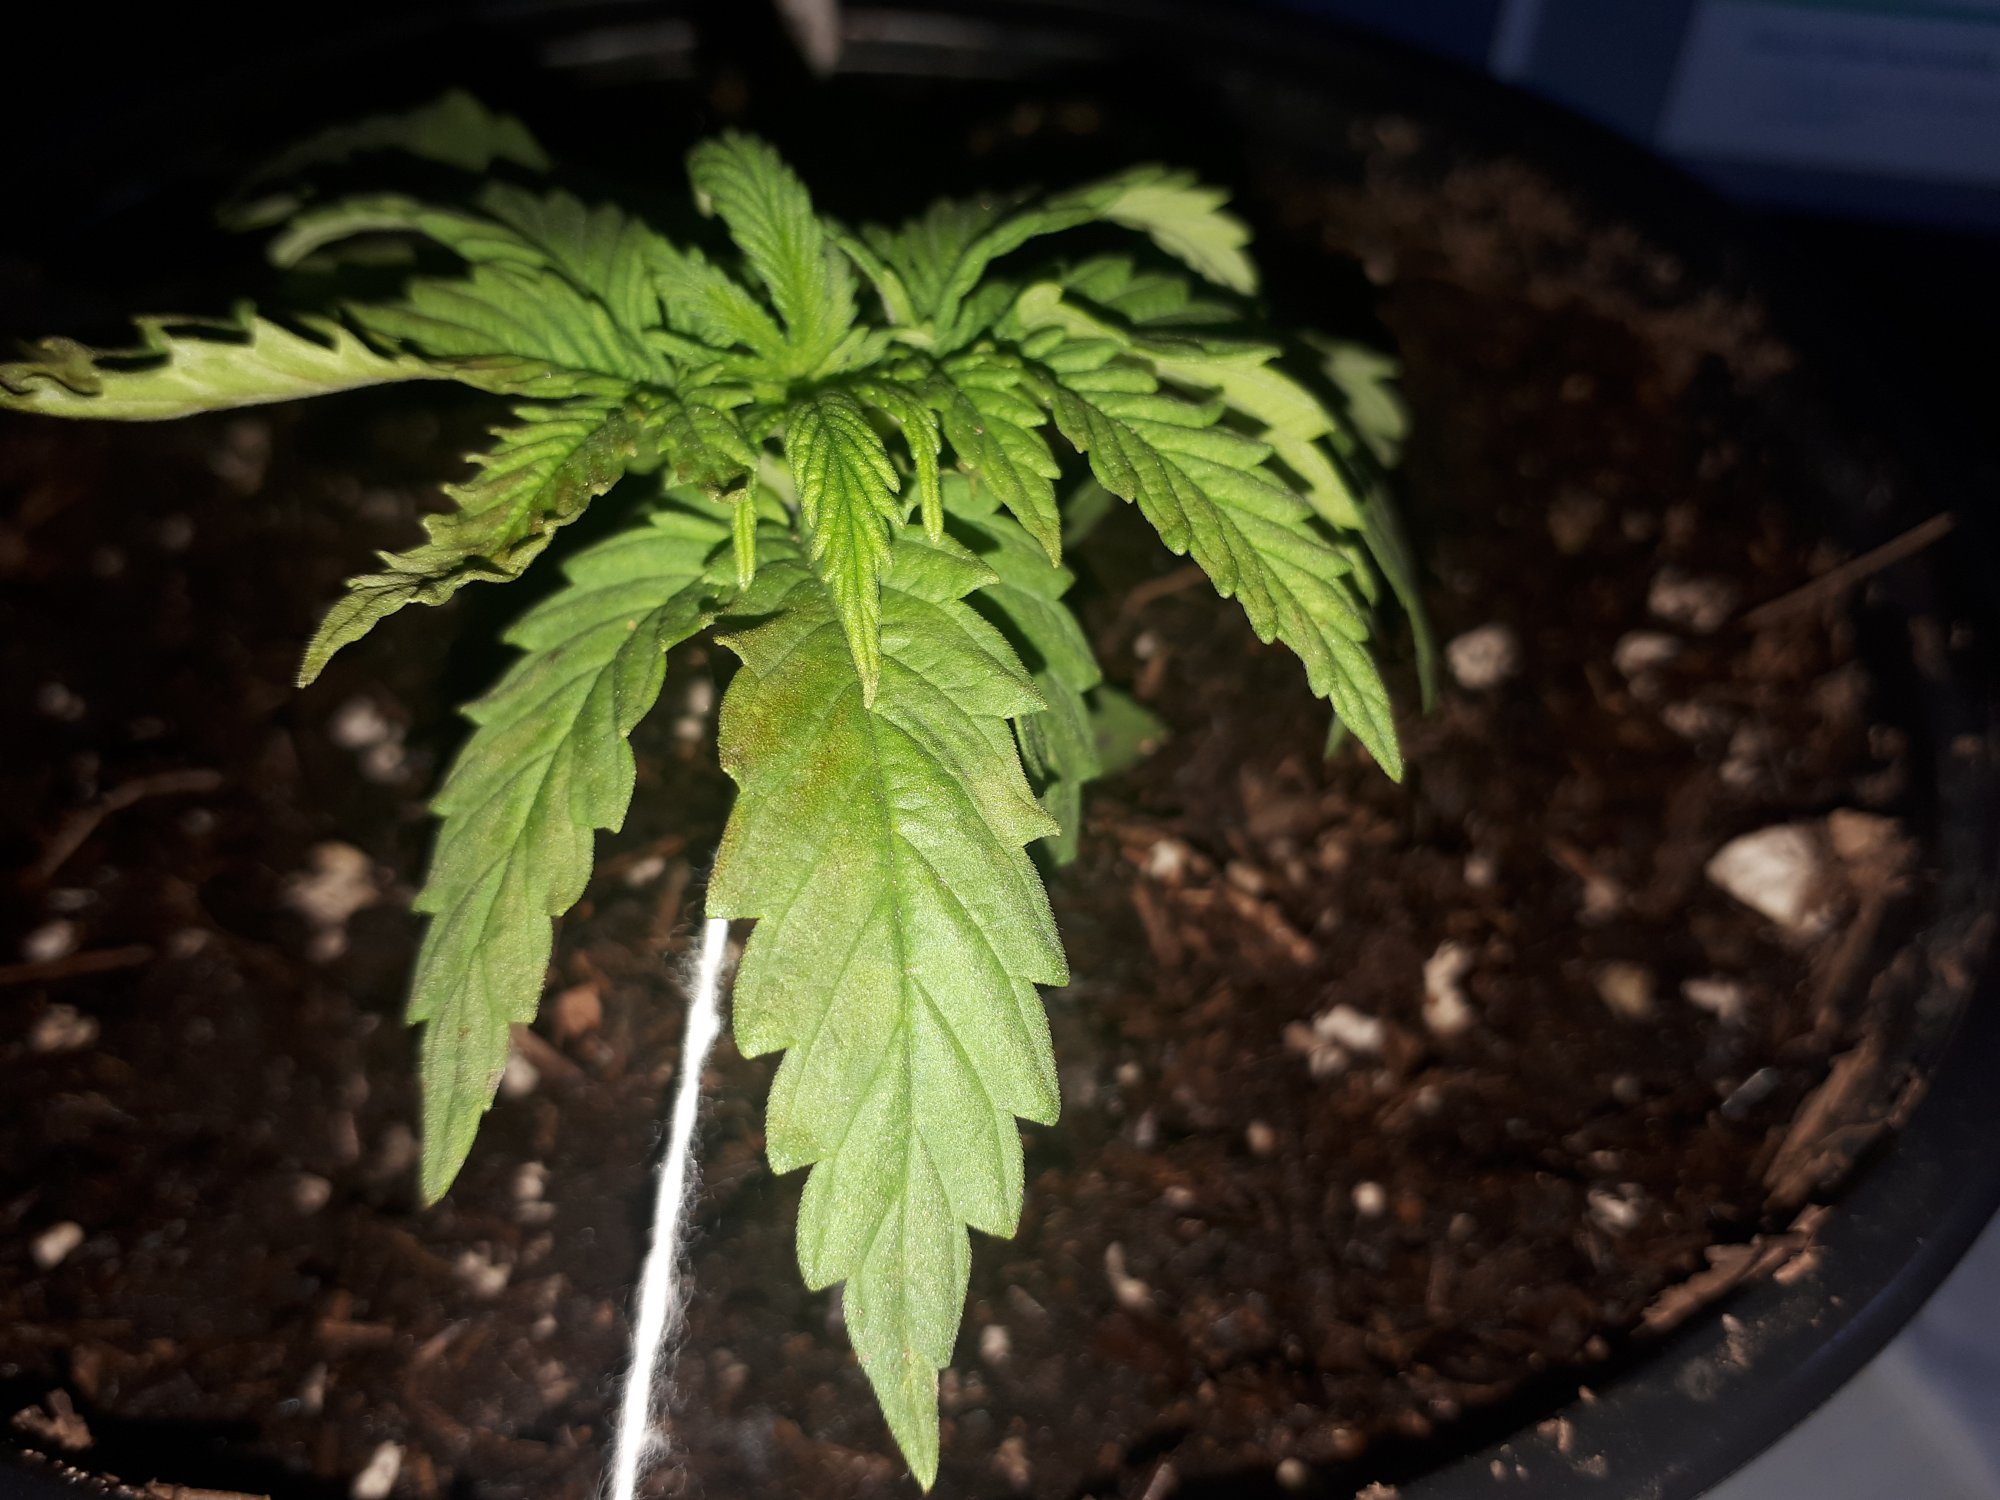 Help my plant stoped growing and now its leafs are turning dark brown and curling up 3